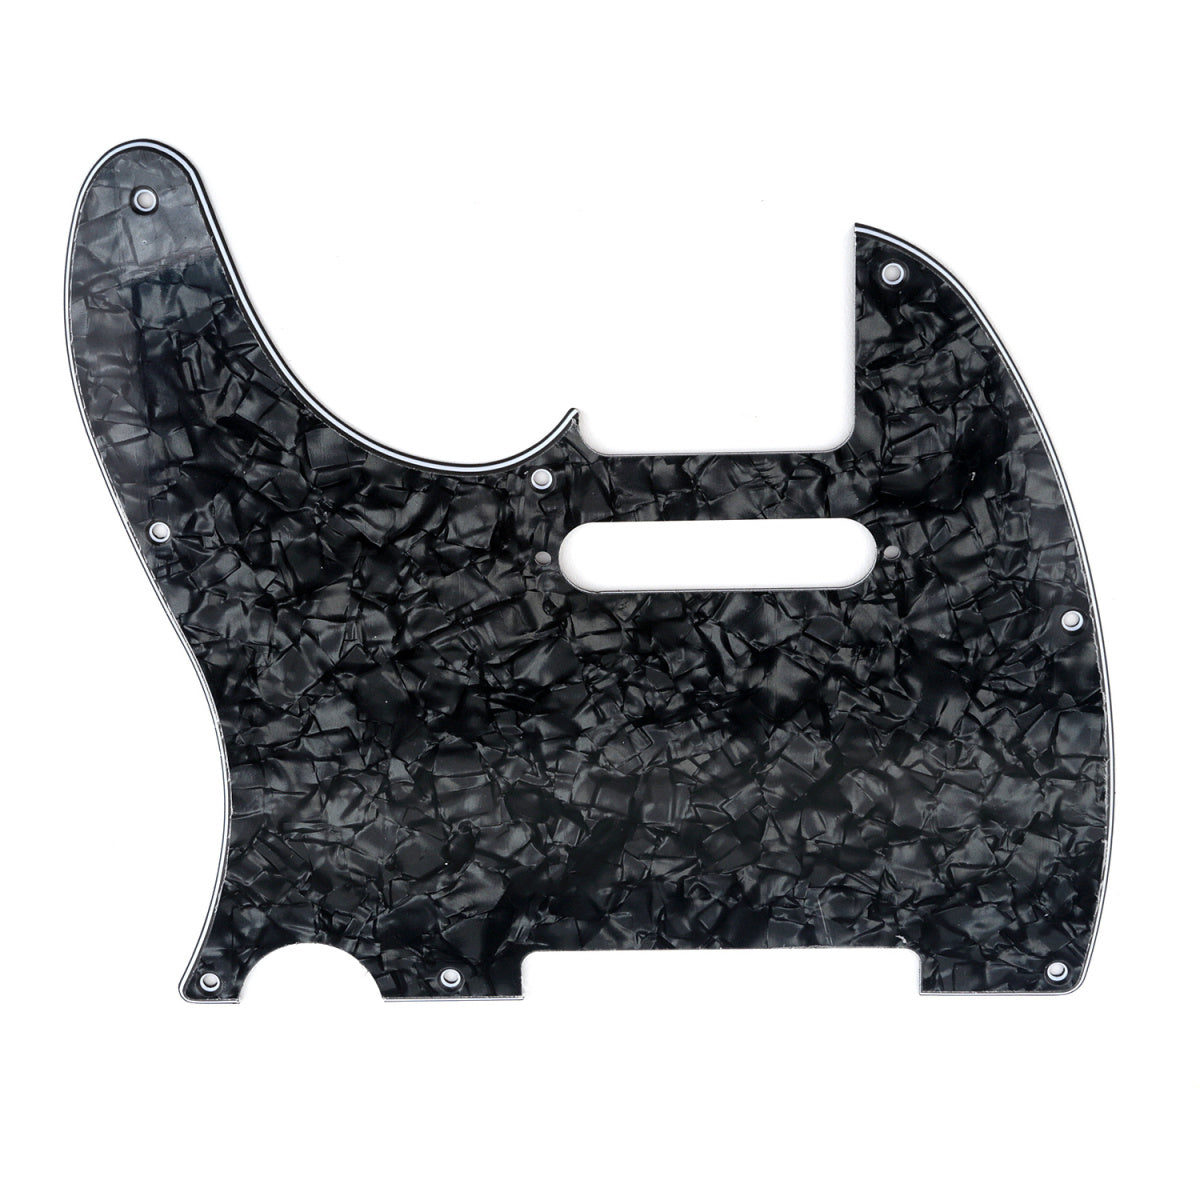 Musiclily Left Handed 8 Hole Guitar Tele Pickguard for American/Mexican Made Fender Telecaster Standard Modern Style, 4Ply Black Pearl